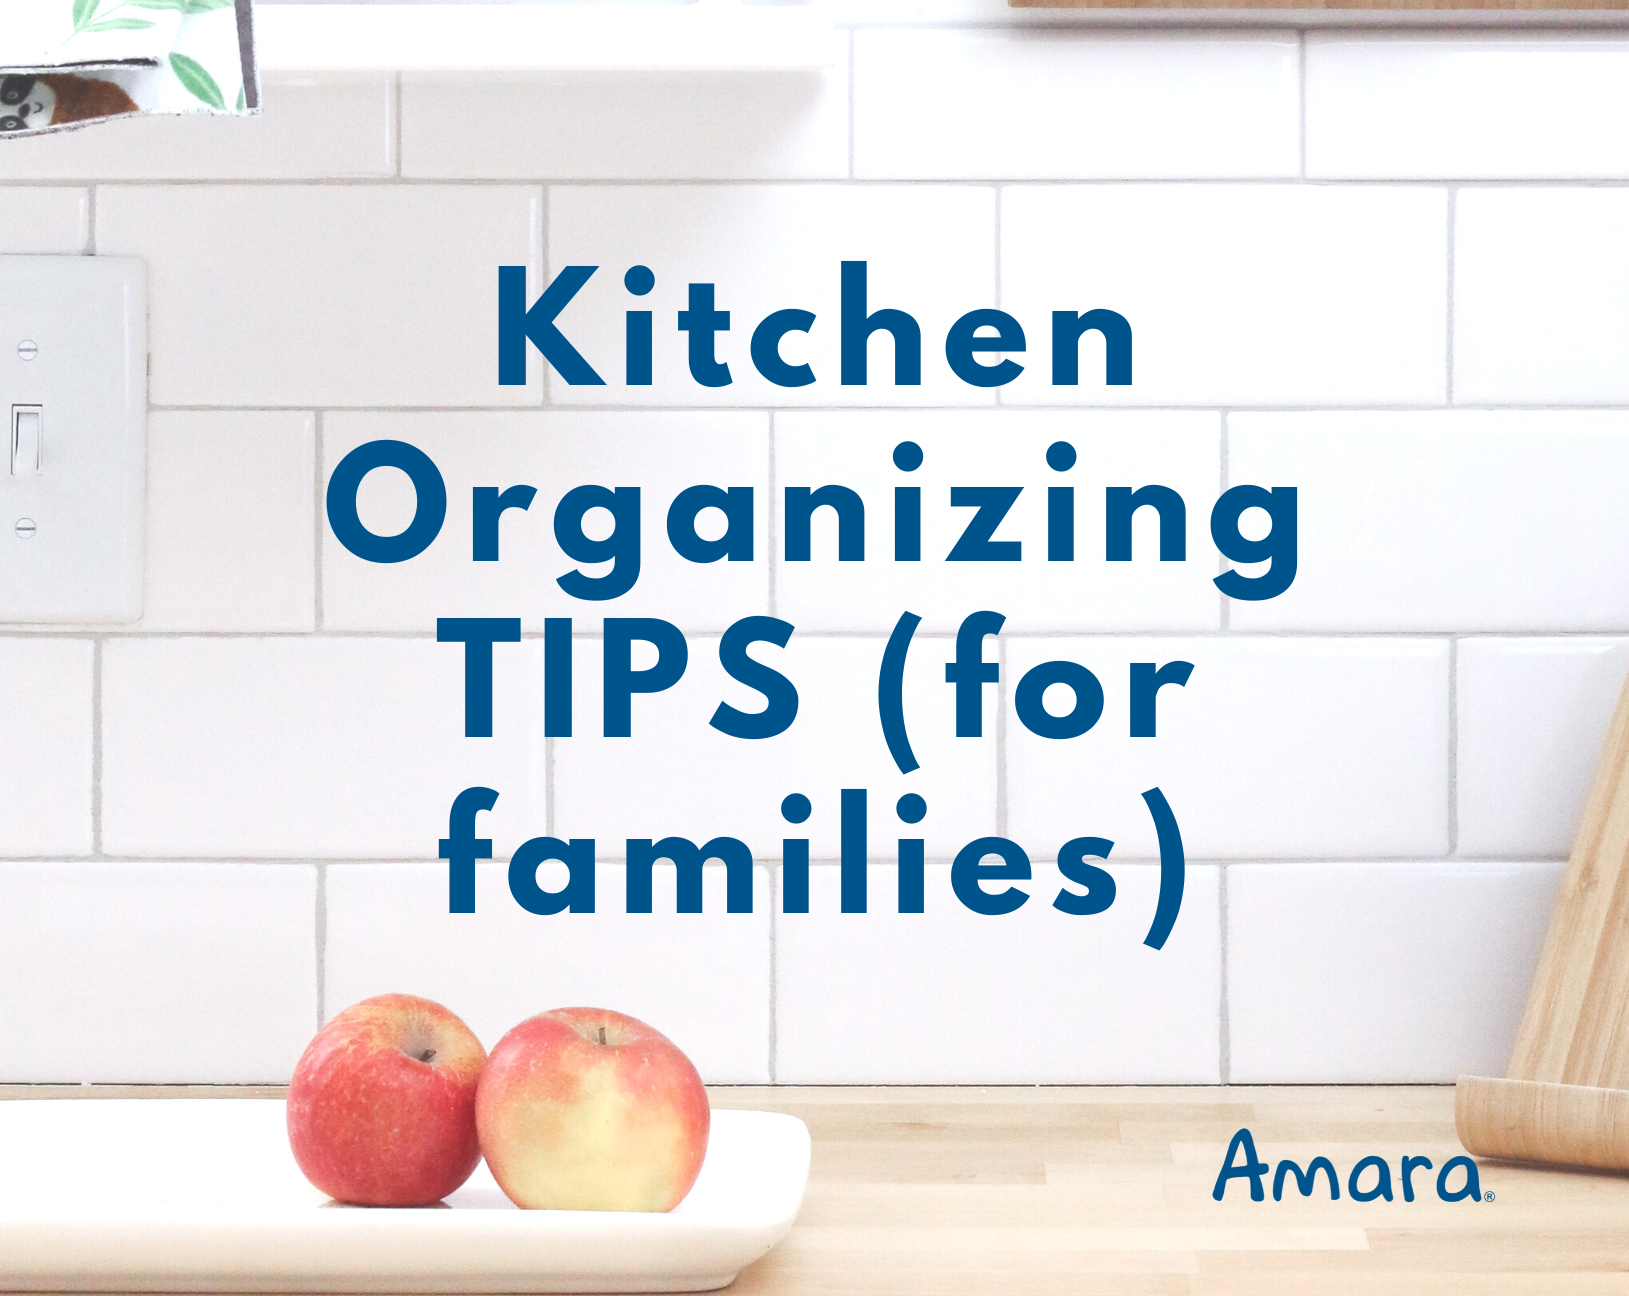 Food Storage and Kitchen Organization Tips for Families